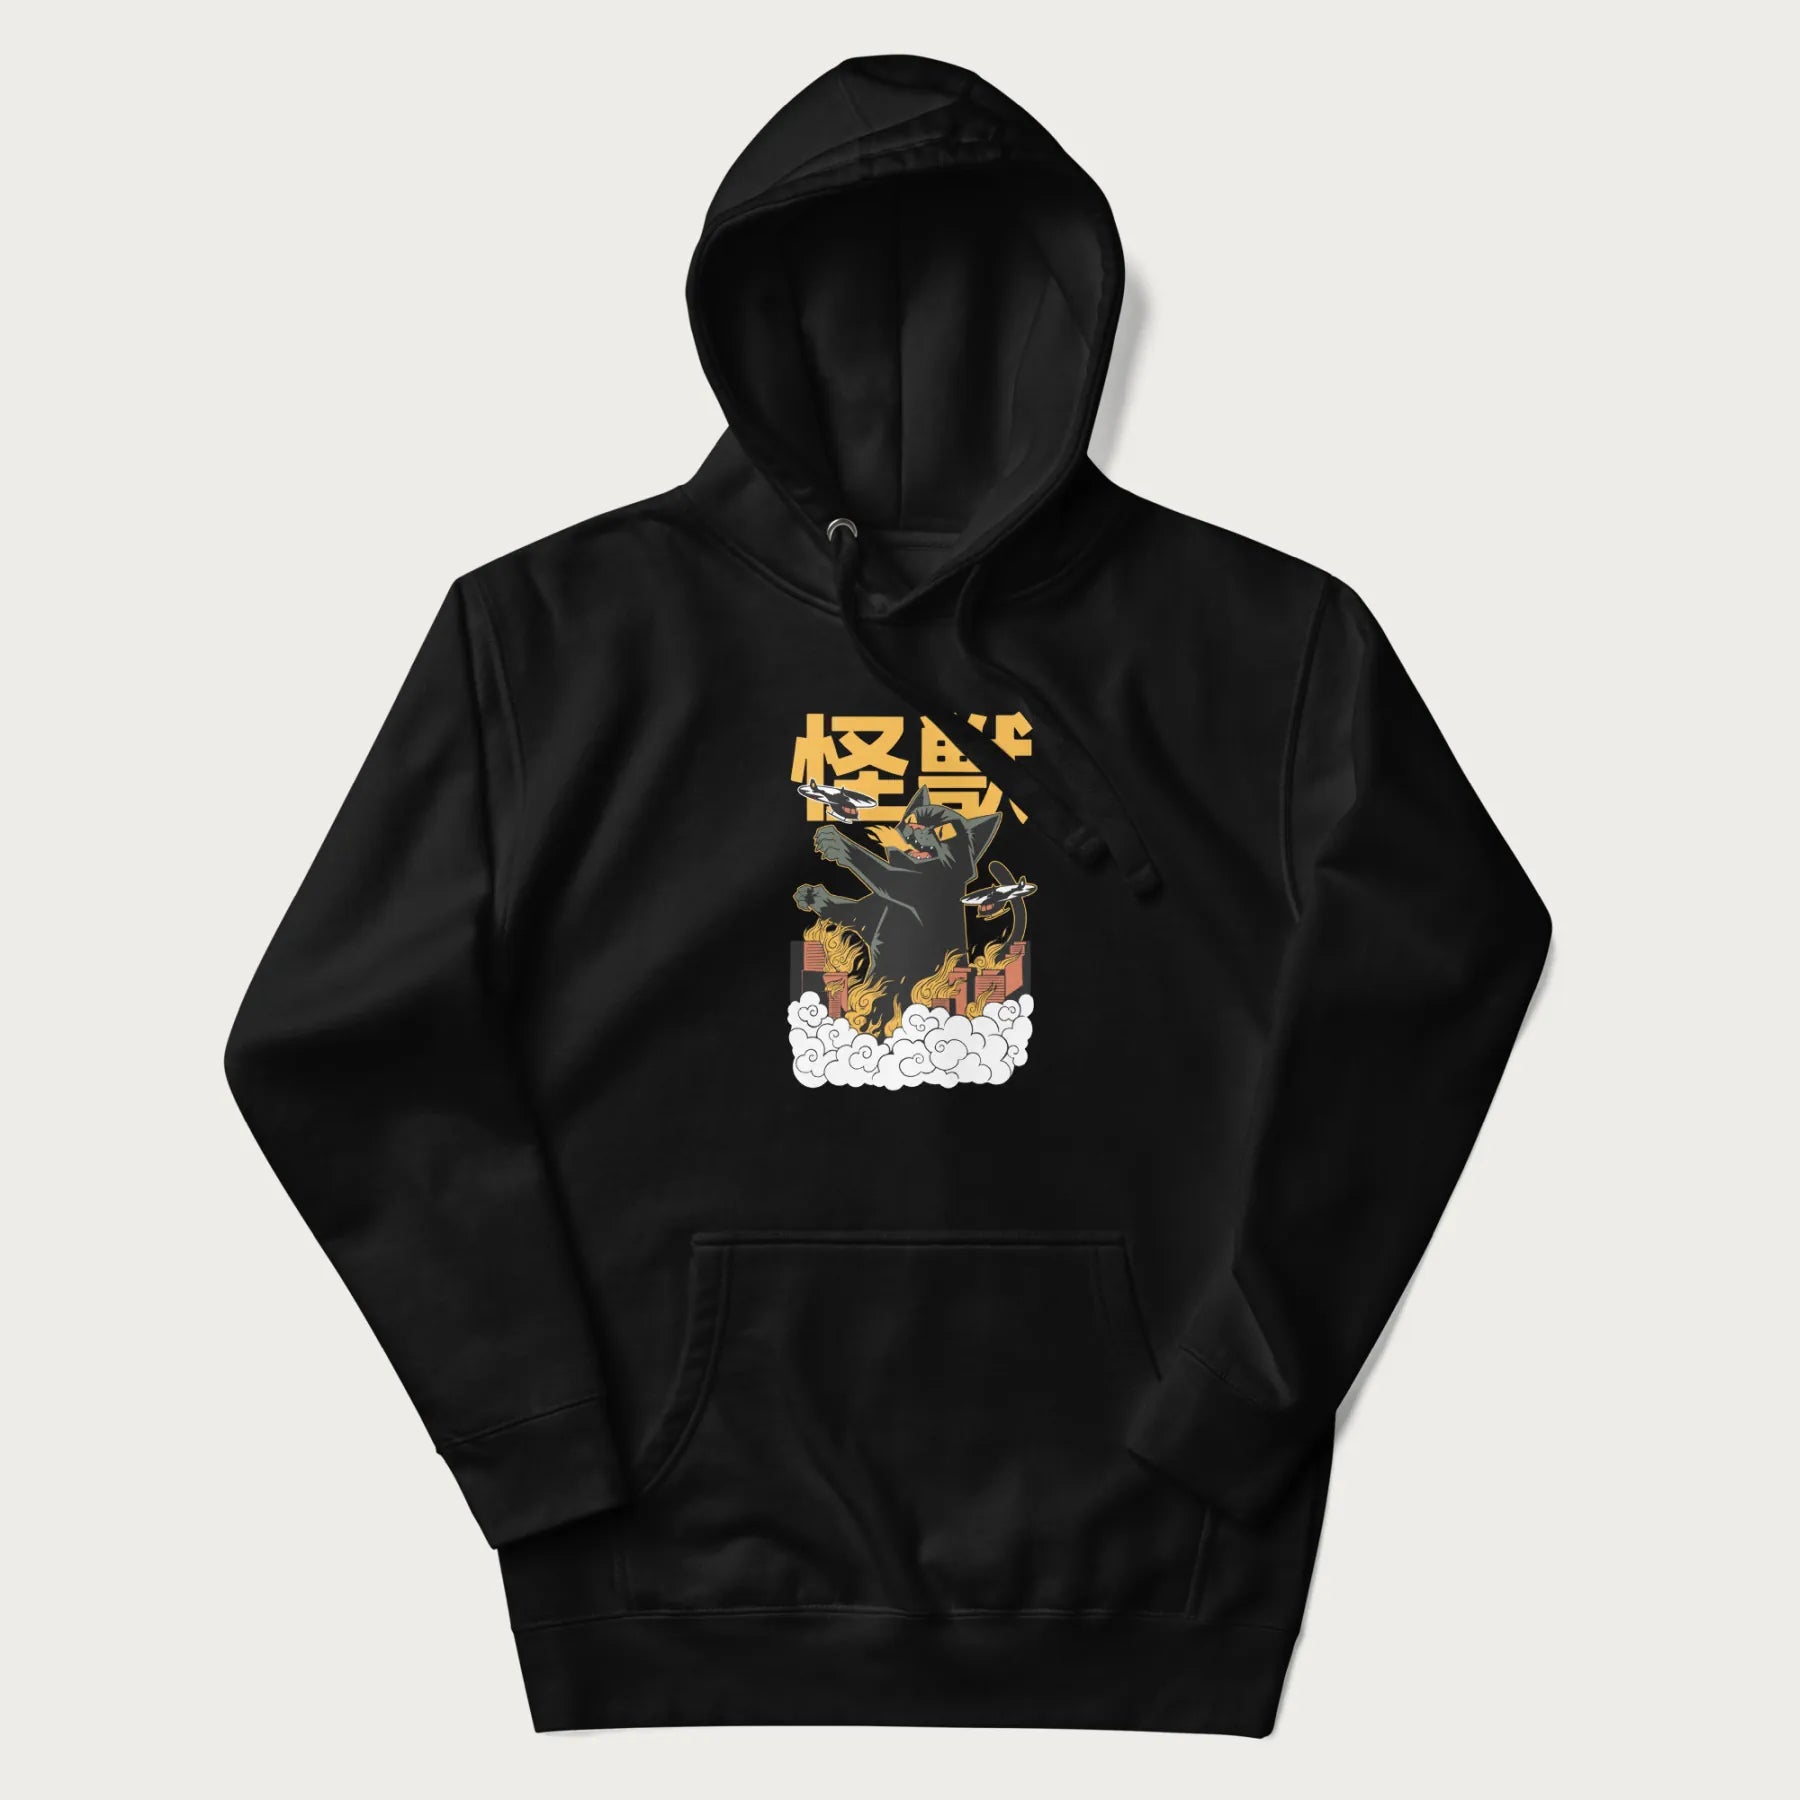 Black hoodie with graphic of a 'Kaiju Cat' with helicopters and flames in a burning city.